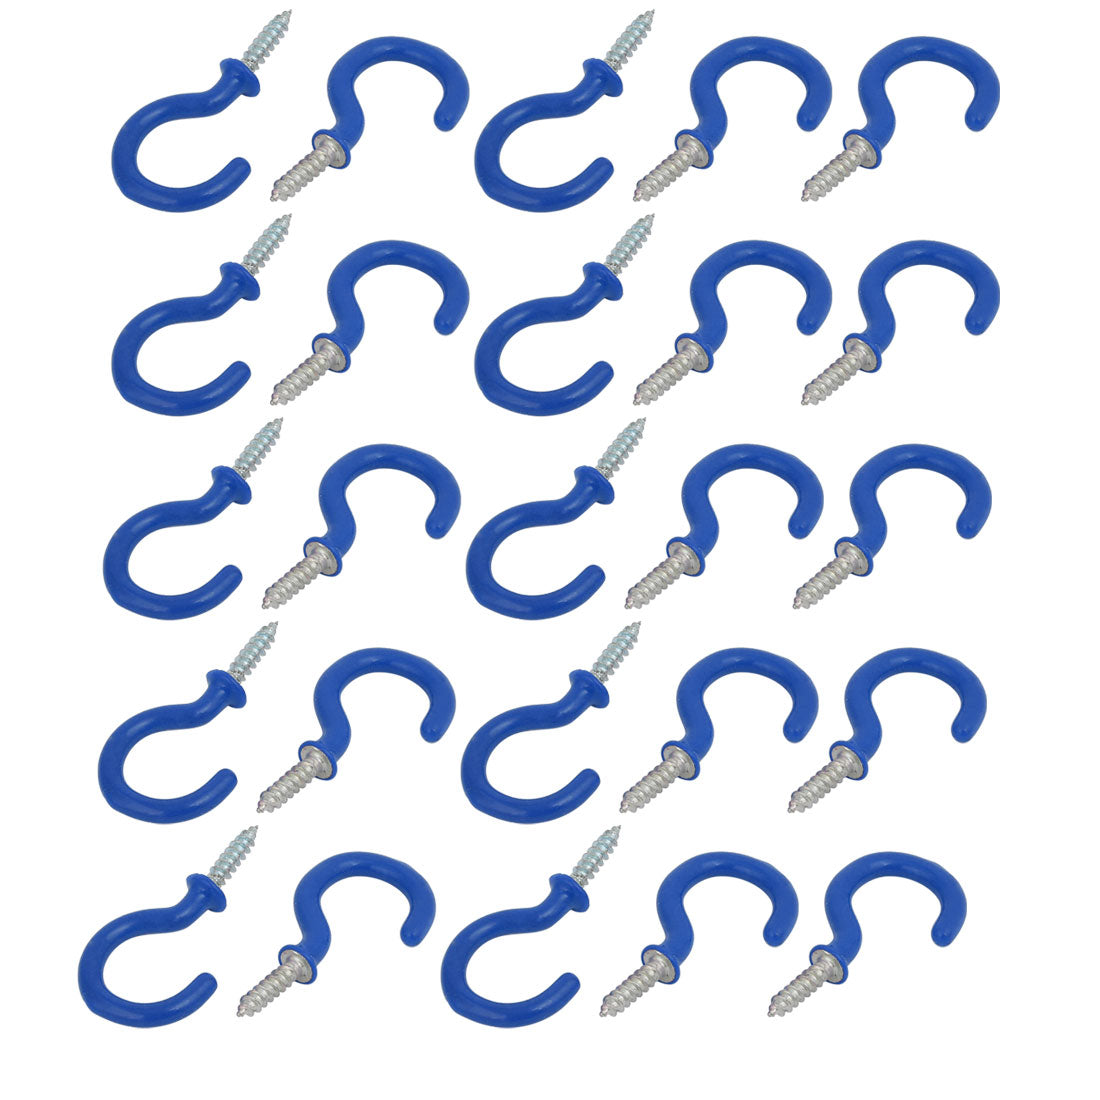 uxcell Uxcell 1 Inch Plastic Coated Screw-in Open Cup Ceiling Hooks Hangers Blue 25pcs